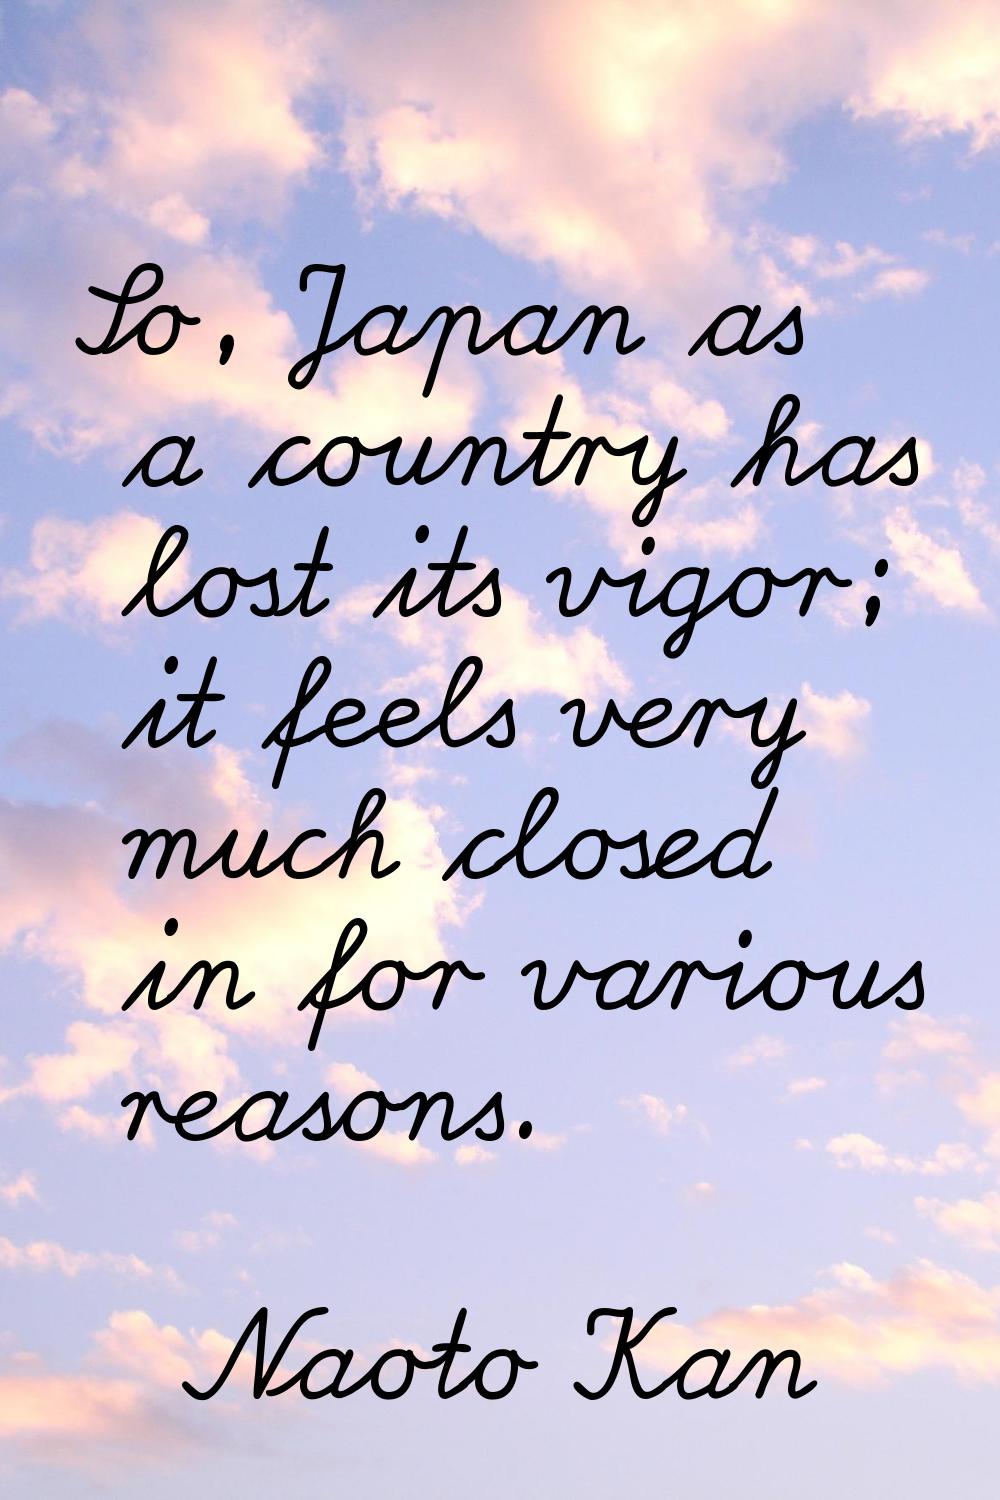 So, Japan as a country has lost its vigor; it feels very much closed in for various reasons.